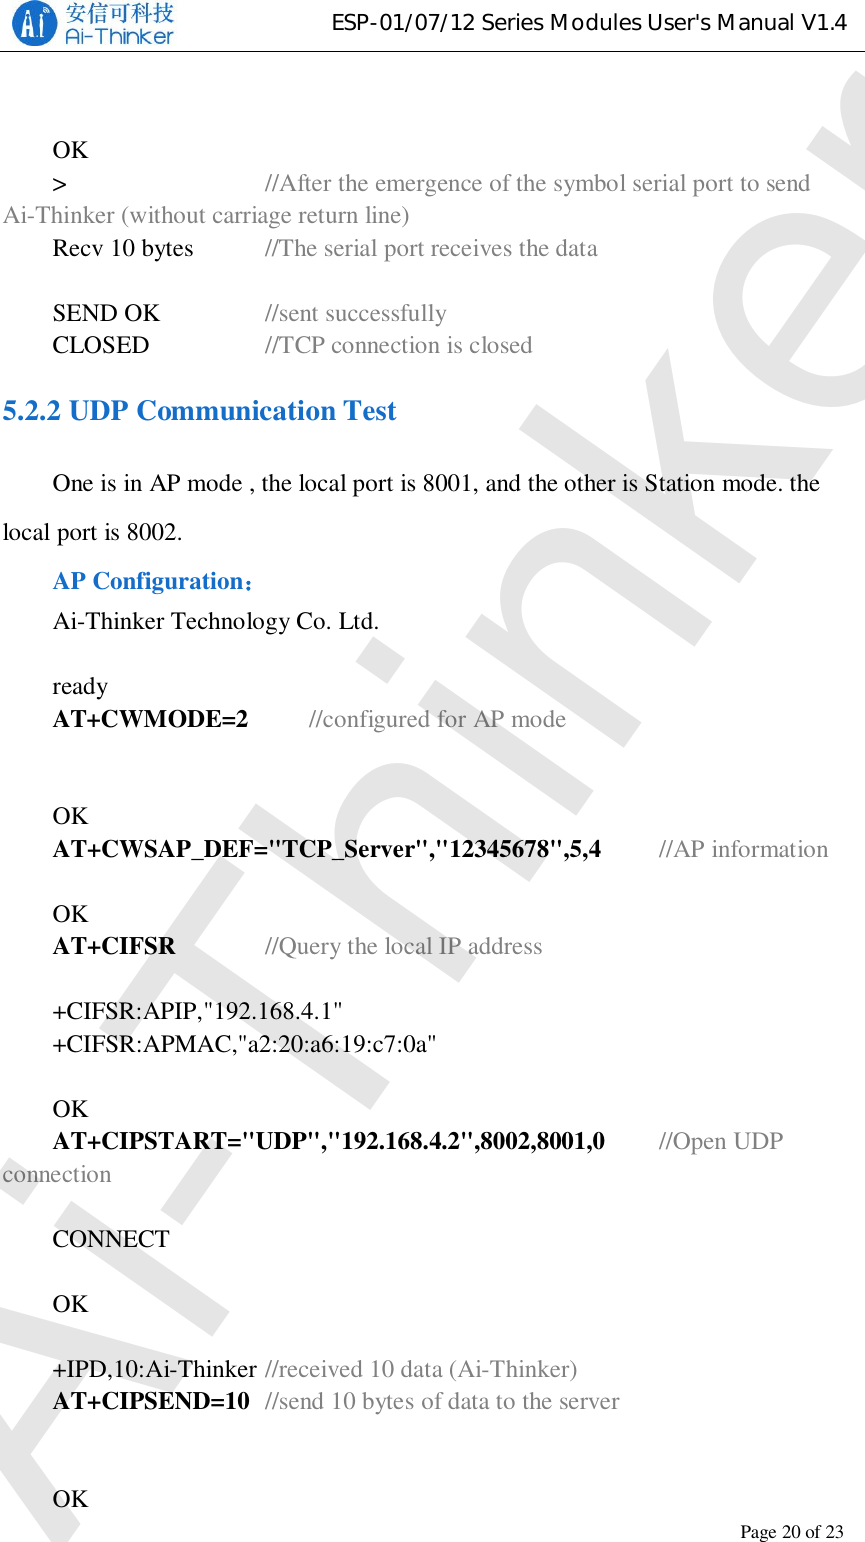 ESP-01/07/12 Series Modules User&apos;s Manual V1.4Copyright © 2017 Shenzhen Ai-Thinker Technology Co., Ltd All Rights ReservedPage20of23OK&gt;//After the emergence of the symbol serial port to sendAi-Thinker (without carriage return line)Recv 10 bytes //The serial port receives the dataSEND OK //sent successfullyCLOSED //TCP connection is closed5.2.2 UDP Communication TestOne is in AP mode , the local port is 8001, and the other is Station mode. thelocal port is 8002.AP ConfigurationAi-Thinker Technology Co. Ltd.readyAT+CWMODE=2 //configured for AP modeOKAT+CWSAP_DEF=&quot;TCP_Server&quot;,&quot;12345678&quot;,5,4 //AP informationOKAT+CIFSR //Query the local IP address+CIFSR:APIP,&quot;192.168.4.1&quot;+CIFSR:APMAC,&quot;a2:20:a6:19:c7:0a&quot;OKAT+CIPSTART=&quot;UDP&quot;,&quot;192.168.4.2&quot;,8002,8001,0 //Open UDPconnectionCONNECTOK+IPD,10:Ai-Thinker //received 10 data (Ai-Thinker)AT+CIPSEND=10 //send 10 bytes of data to the serverOKAi-Thinker